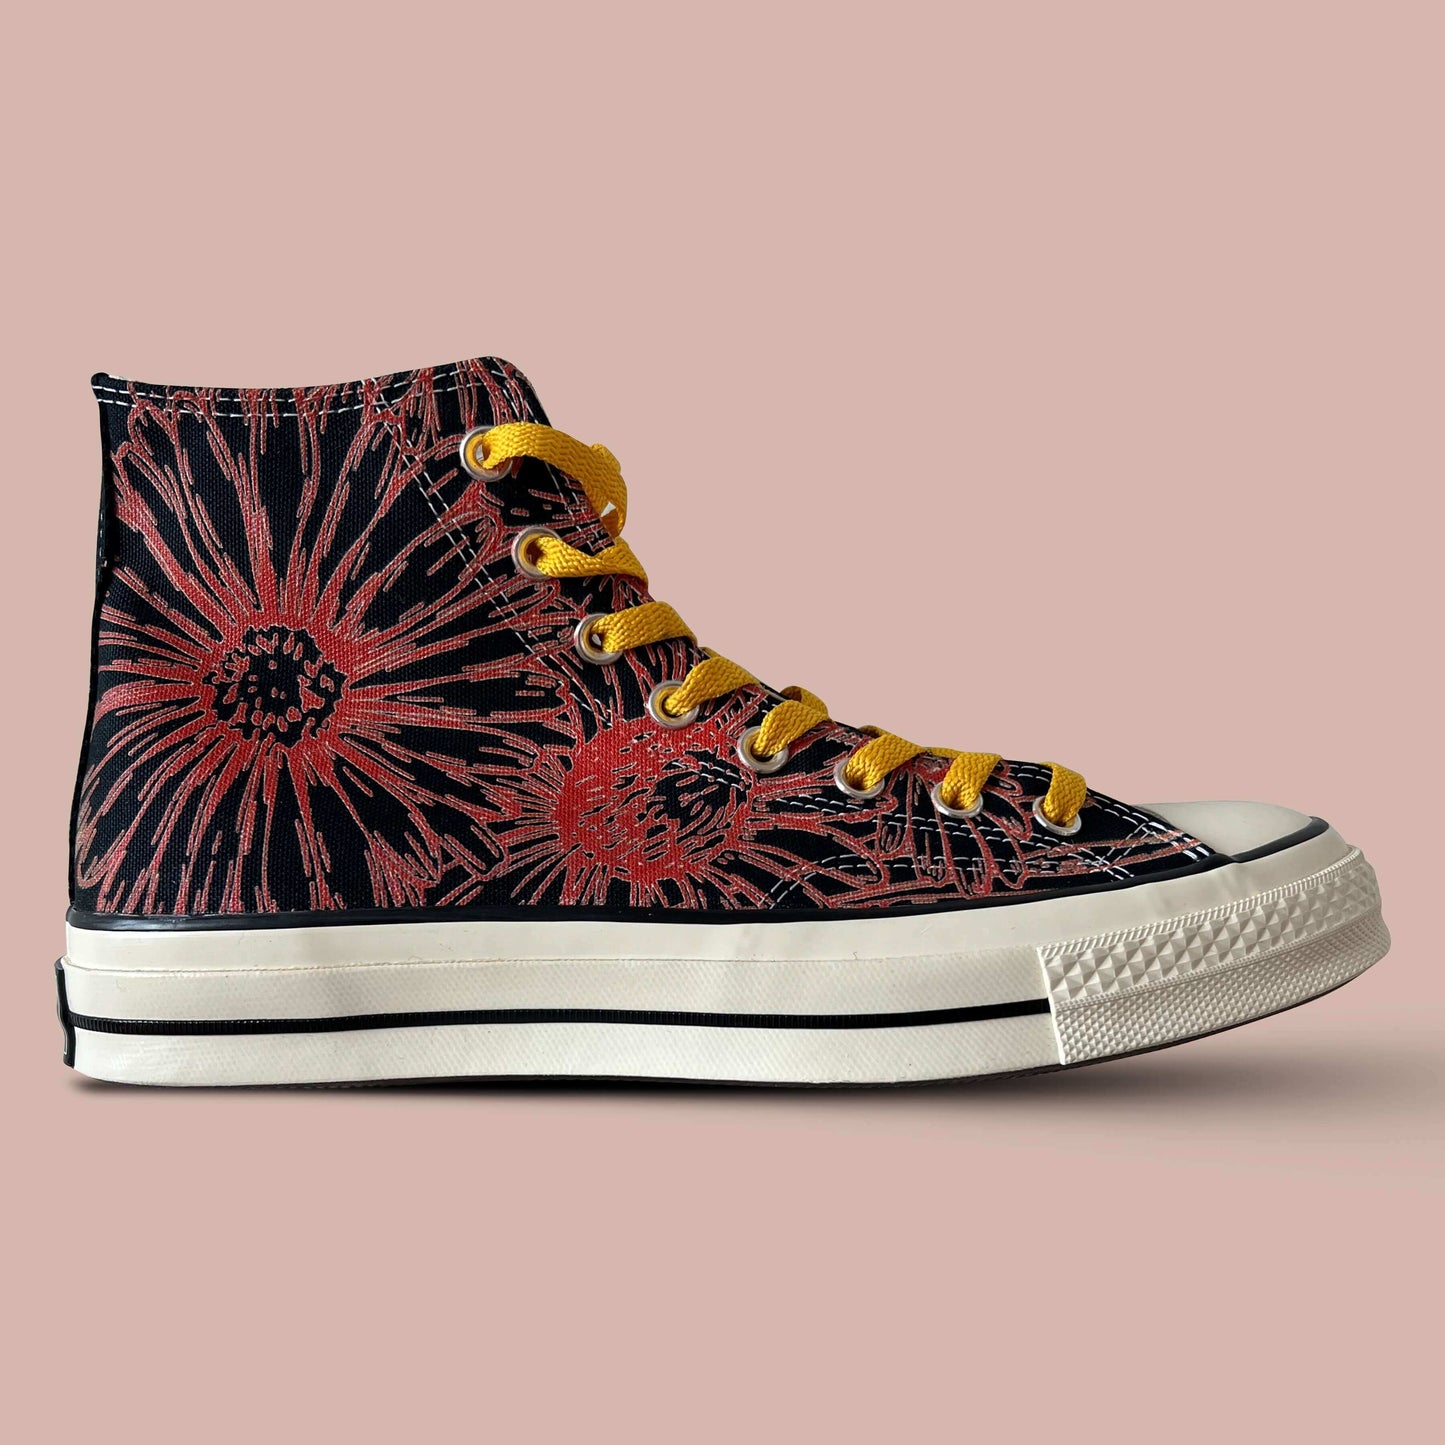 "Buy More Flowers!" Objects by SO x Converse Chuck 70s Hi (Black)